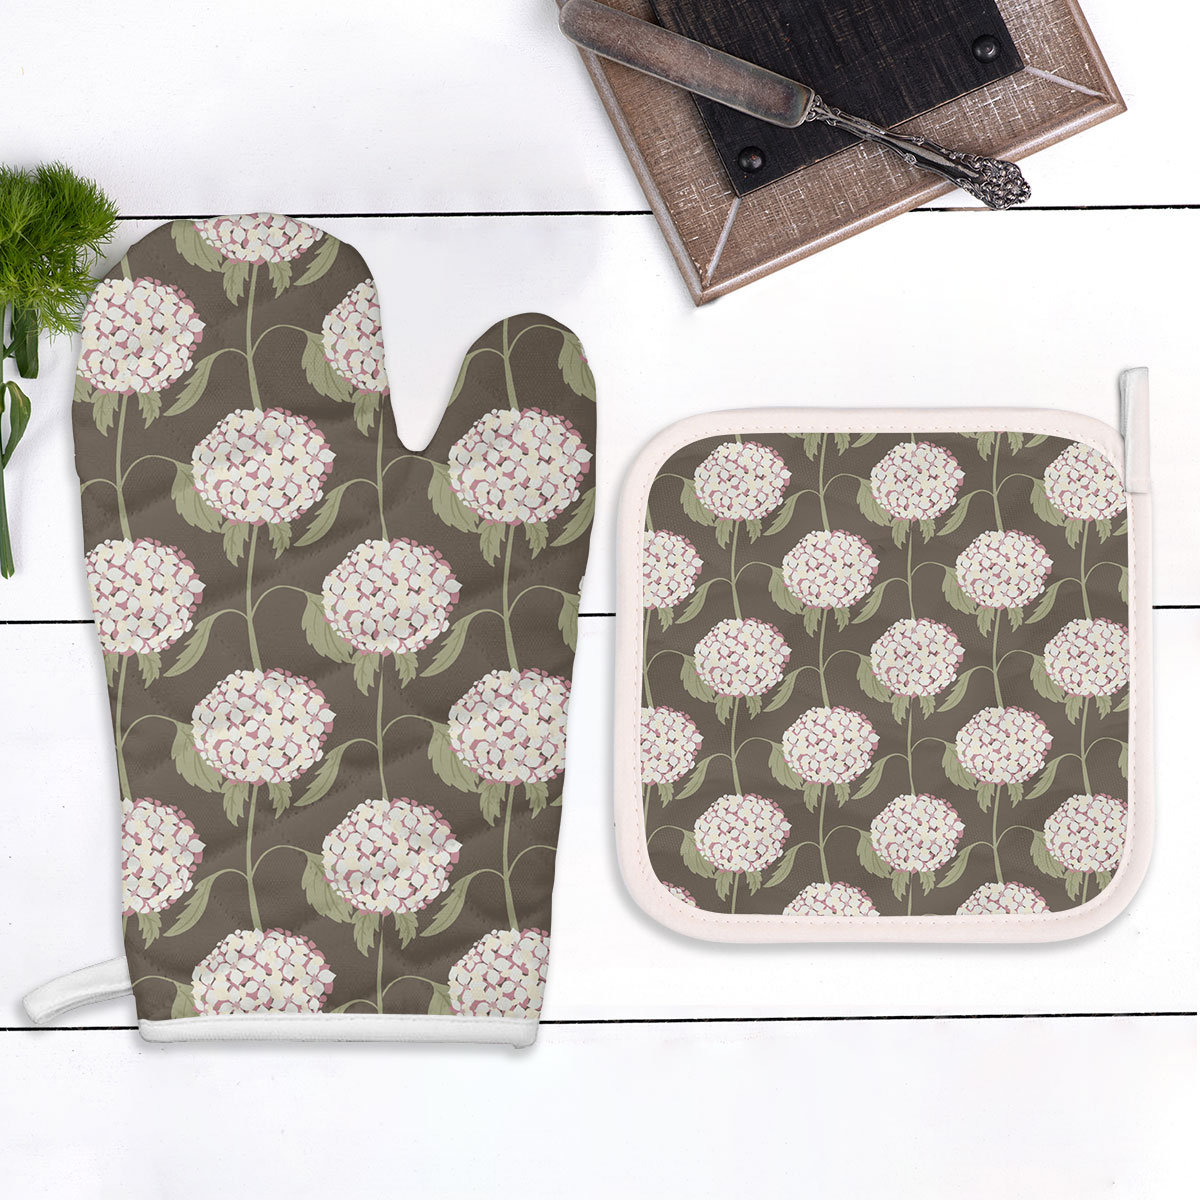 Abstract Nature With White Hydrangea Flowers Oven Mitts Pot Holder Set